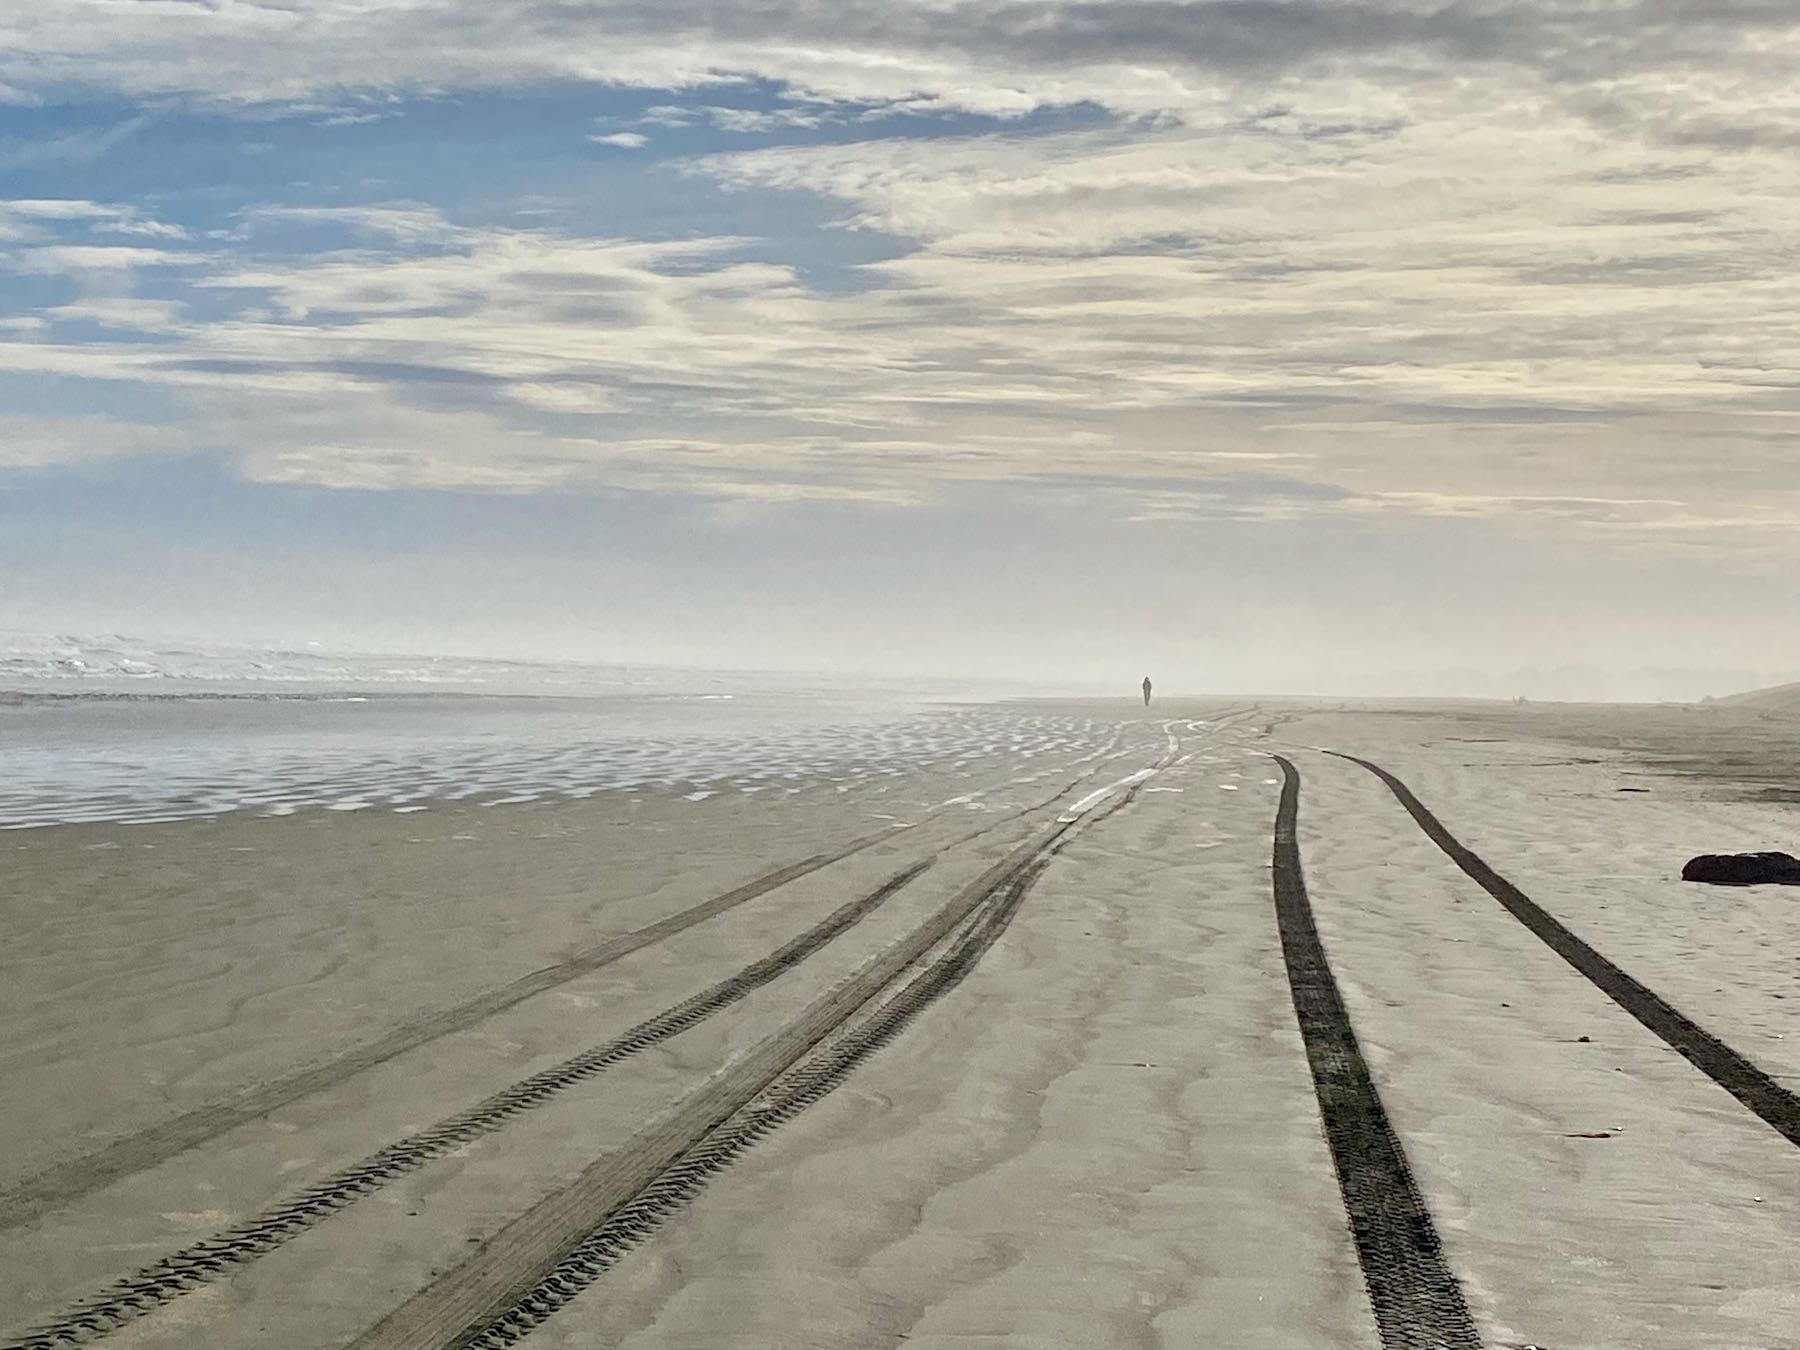 Tire tracks along the beach leading to the distance with a runner receding into the mist. 